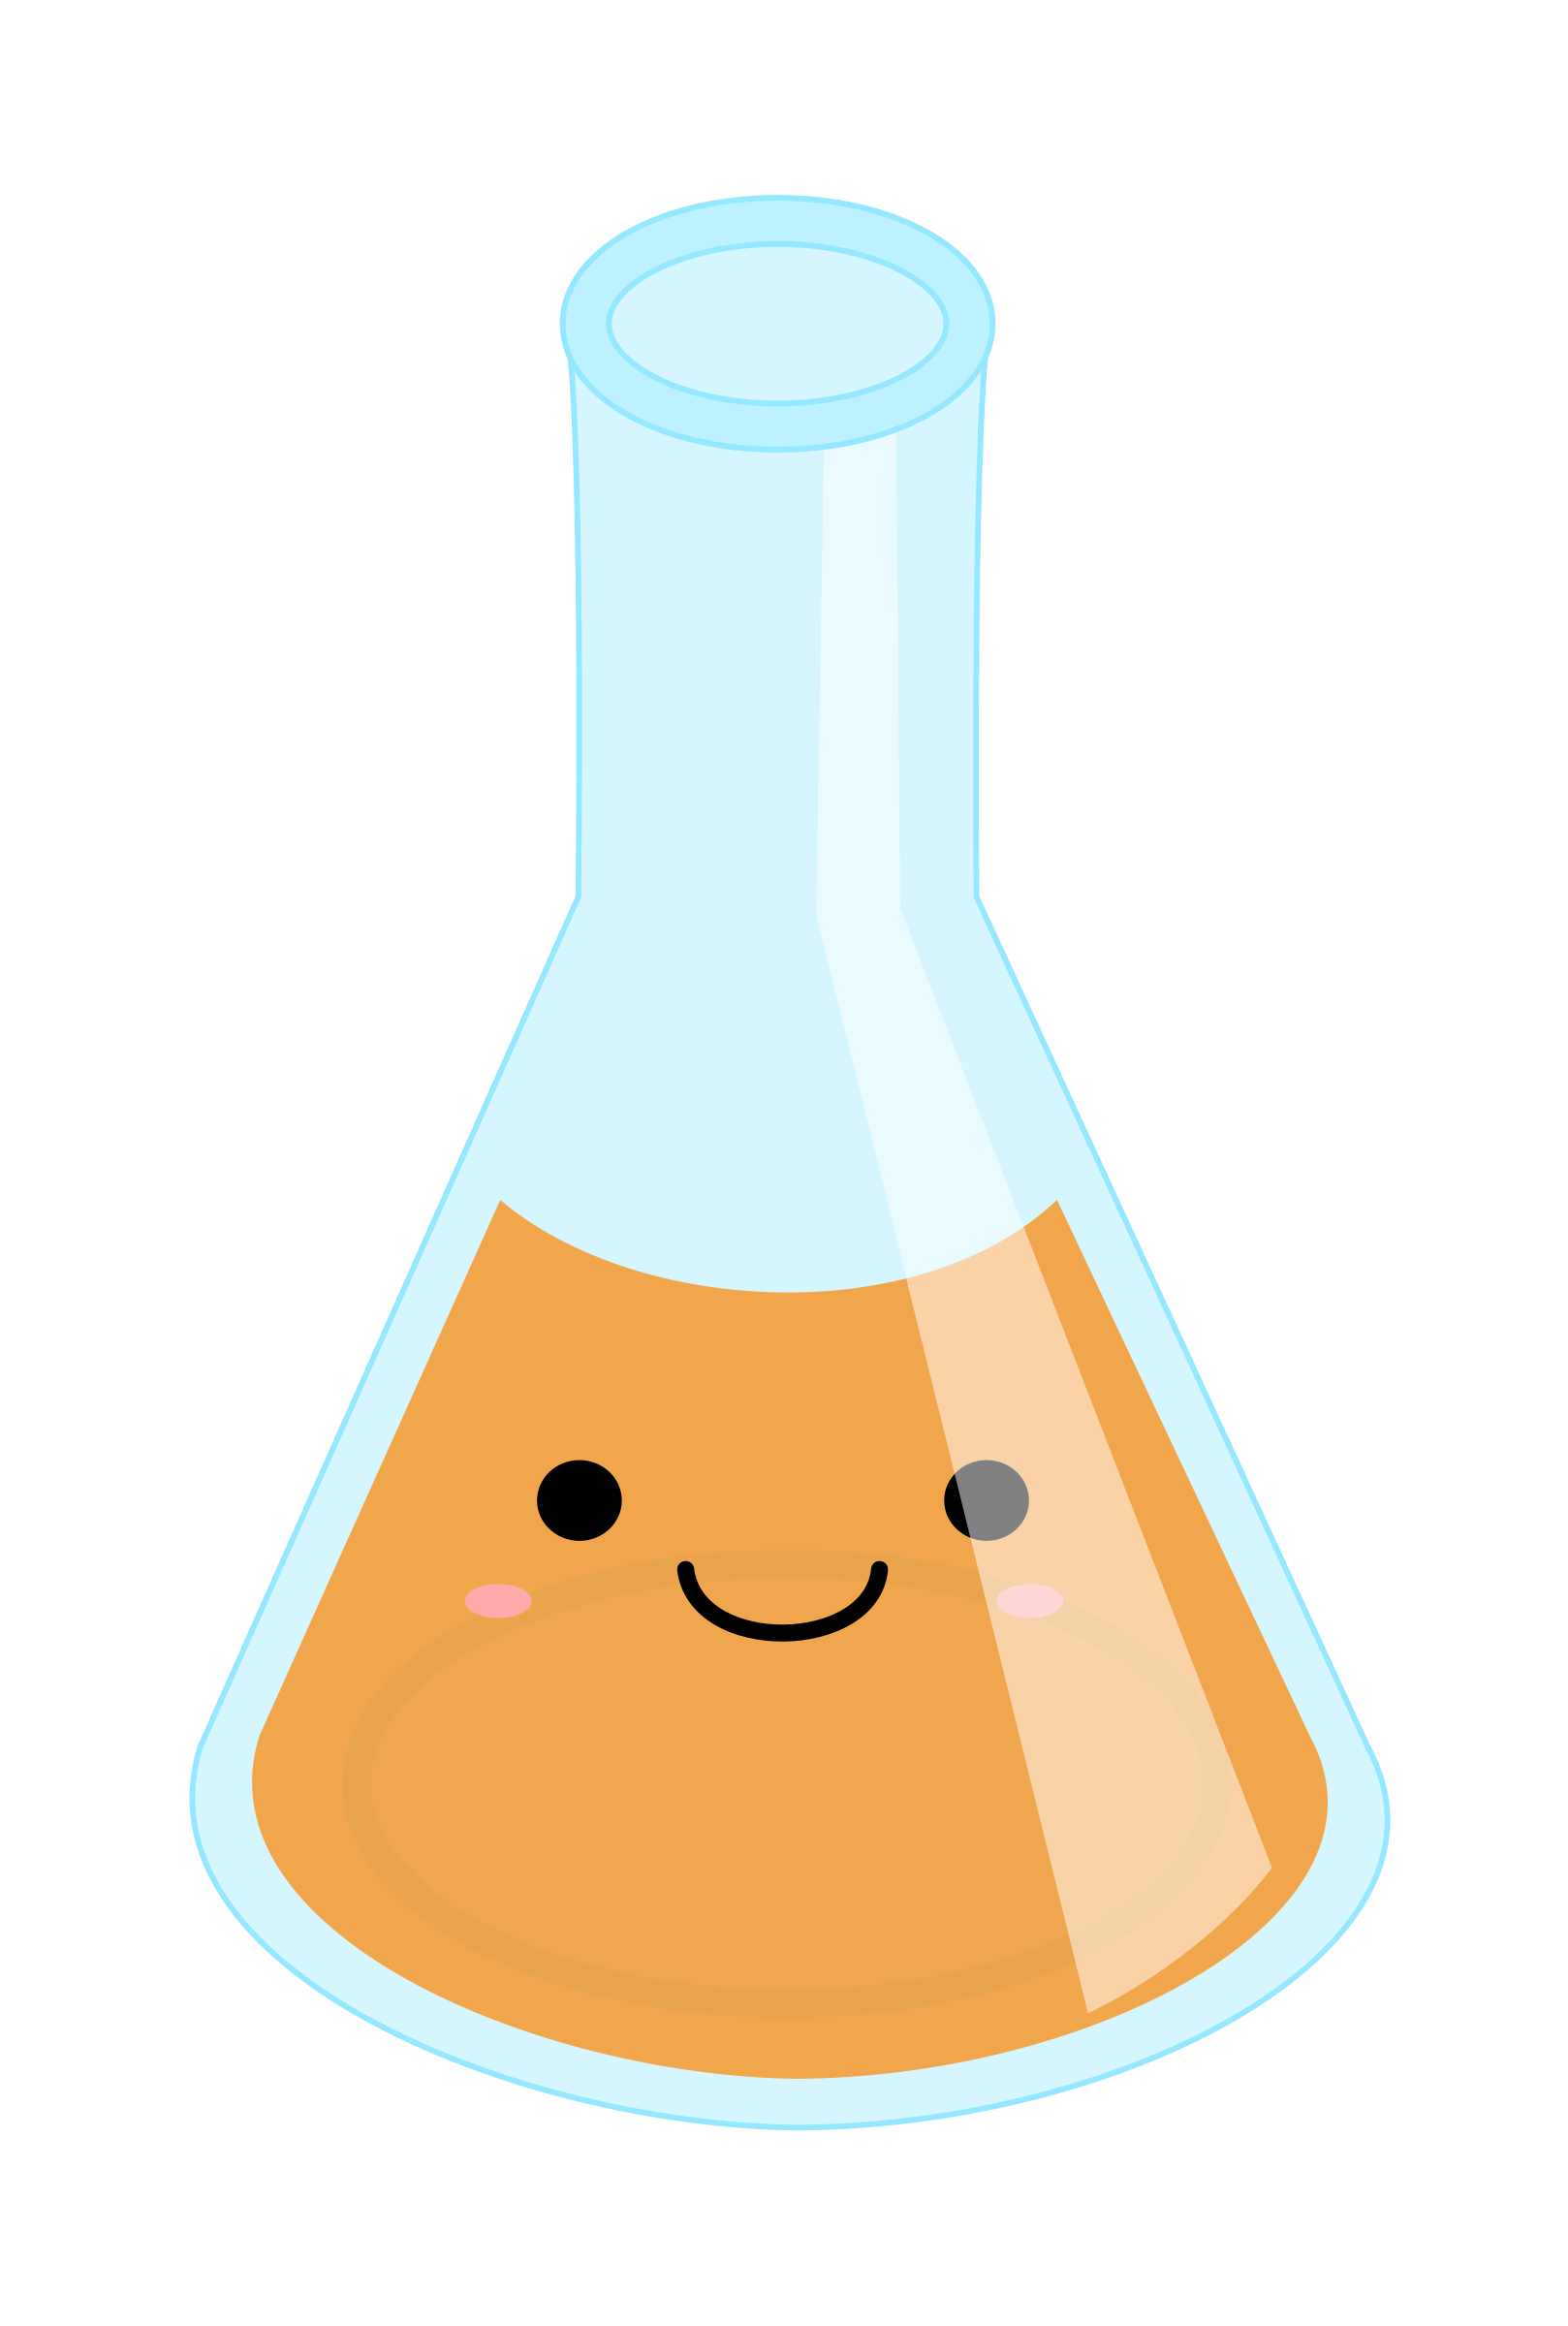 Full kawaii erlenmeyer flask. Clothing clipart spare clothes